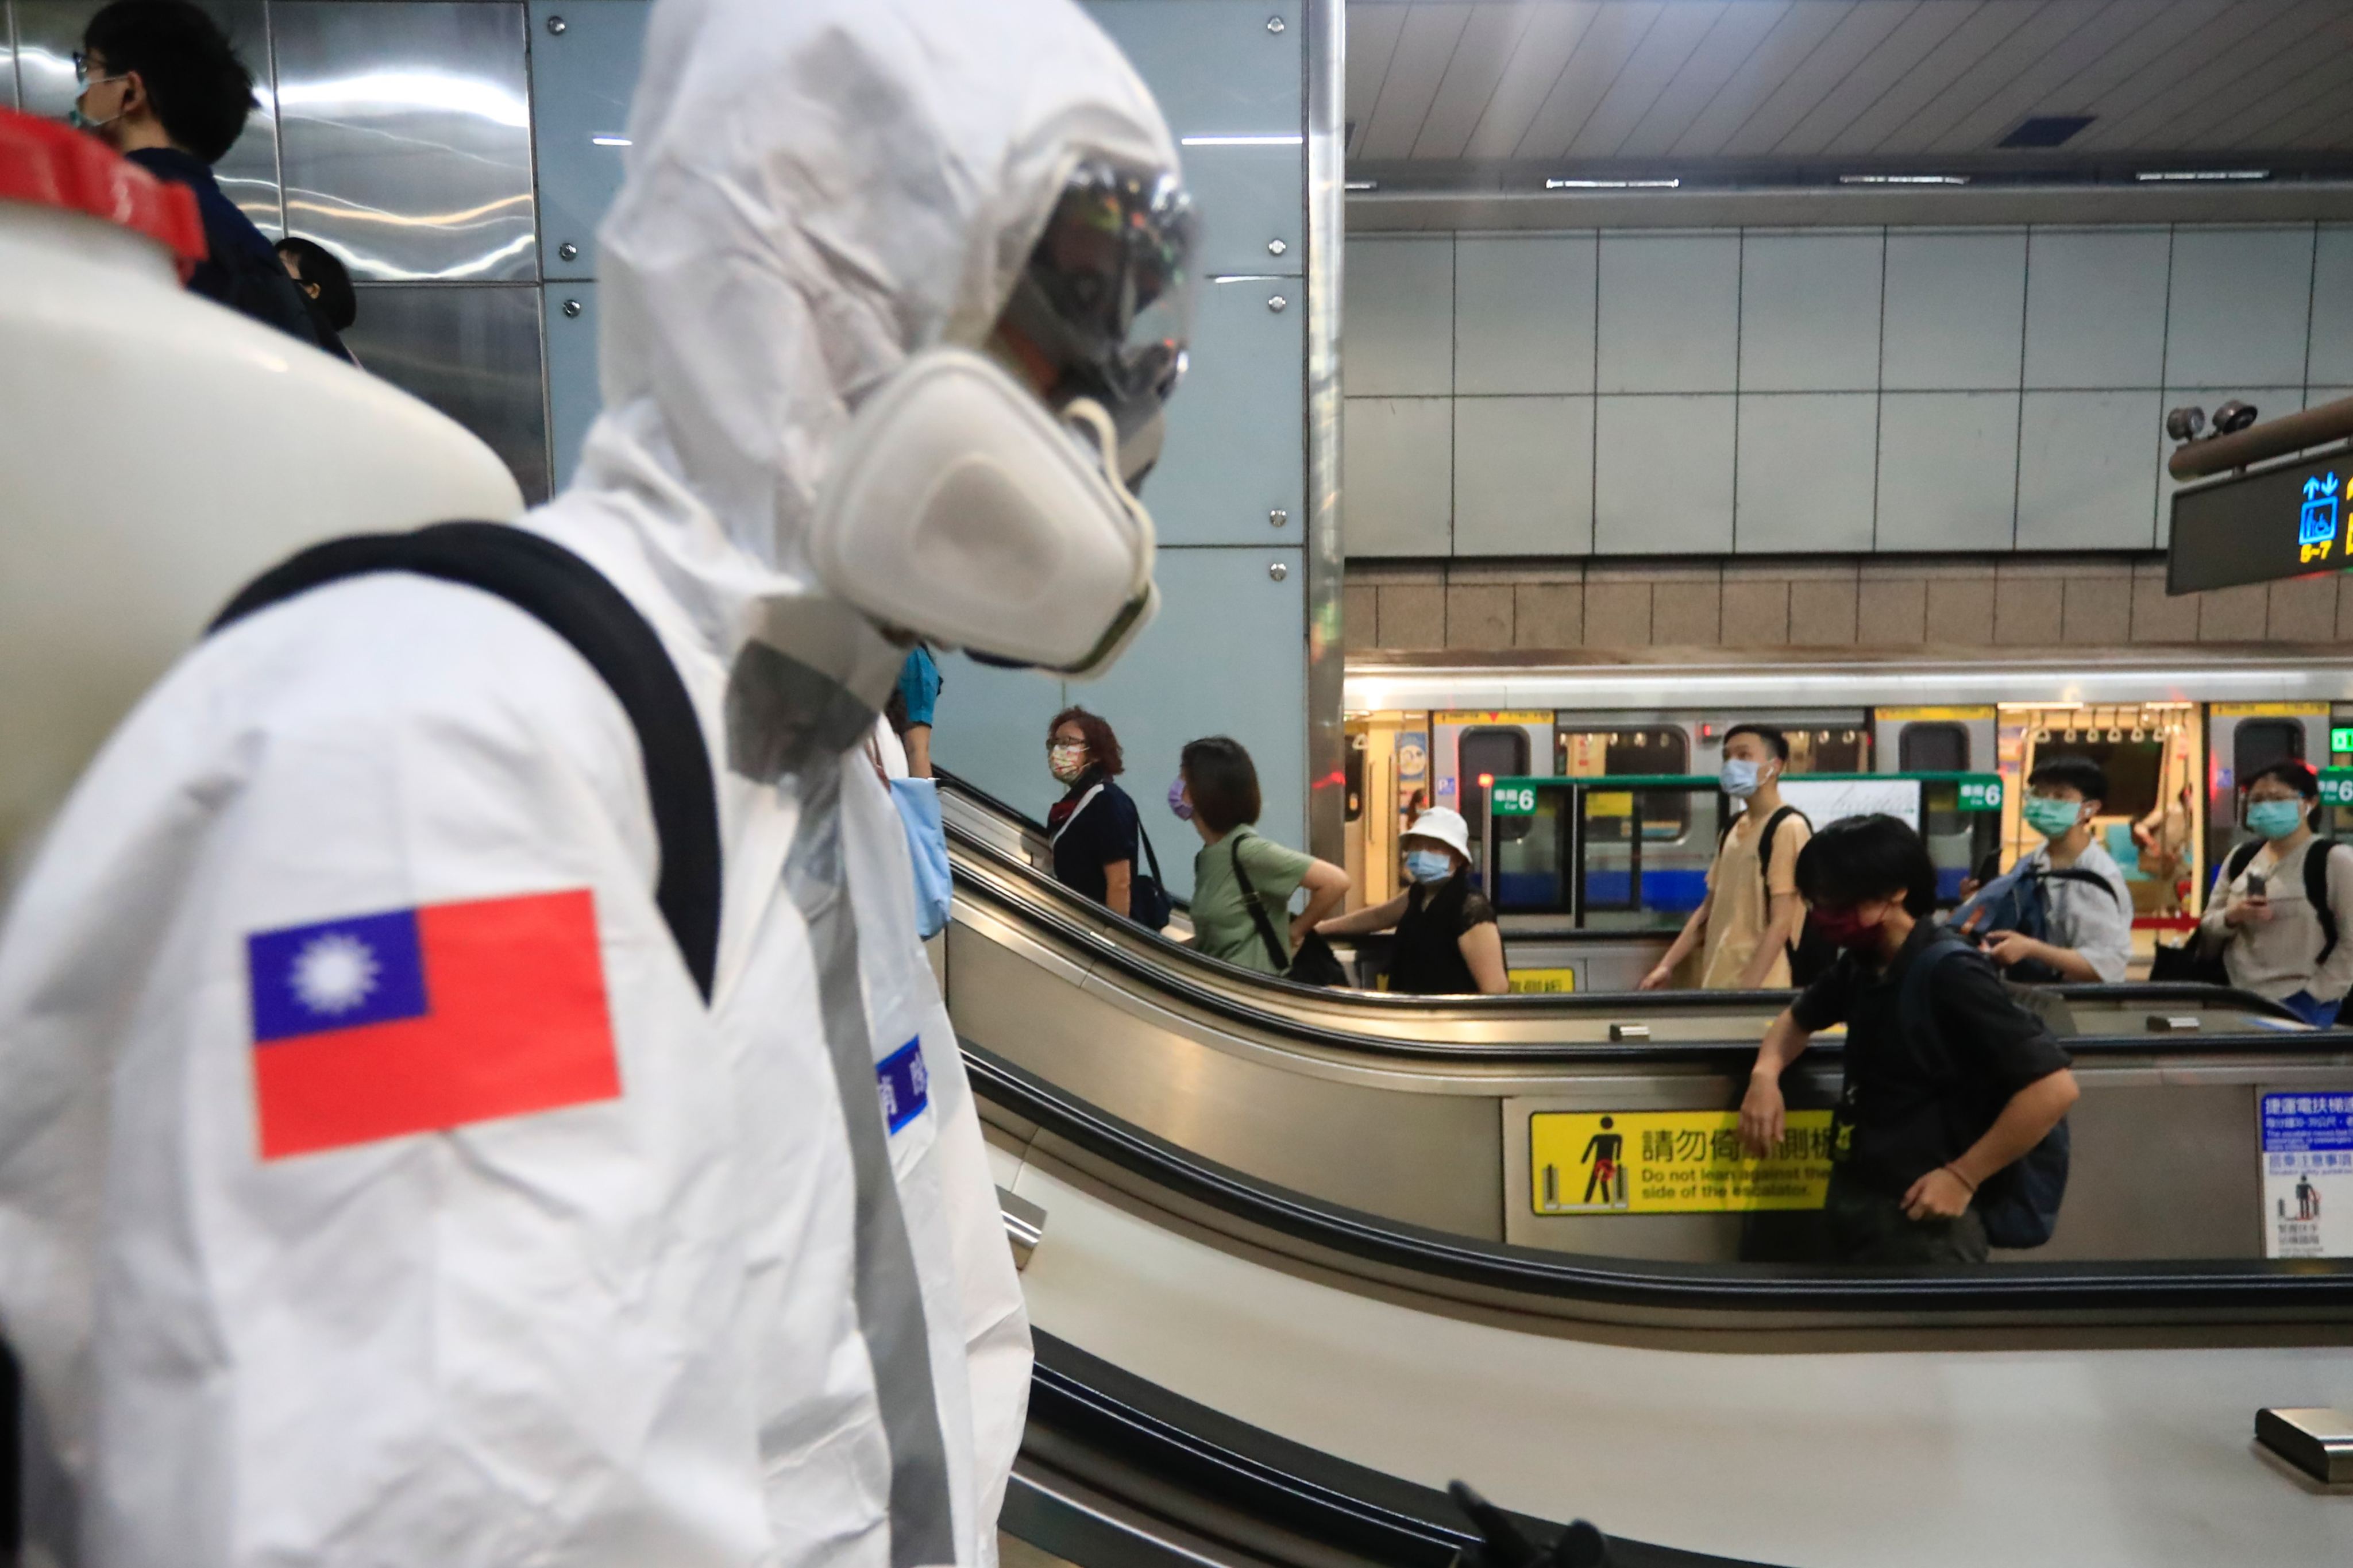 Military officers disinfect public areas and transport in Taipei, Taiwan, on June 8, 2021, following a coronavirus outbreak across the island and an increasing number of deaths. Photo: NurPhoto via Getty Images